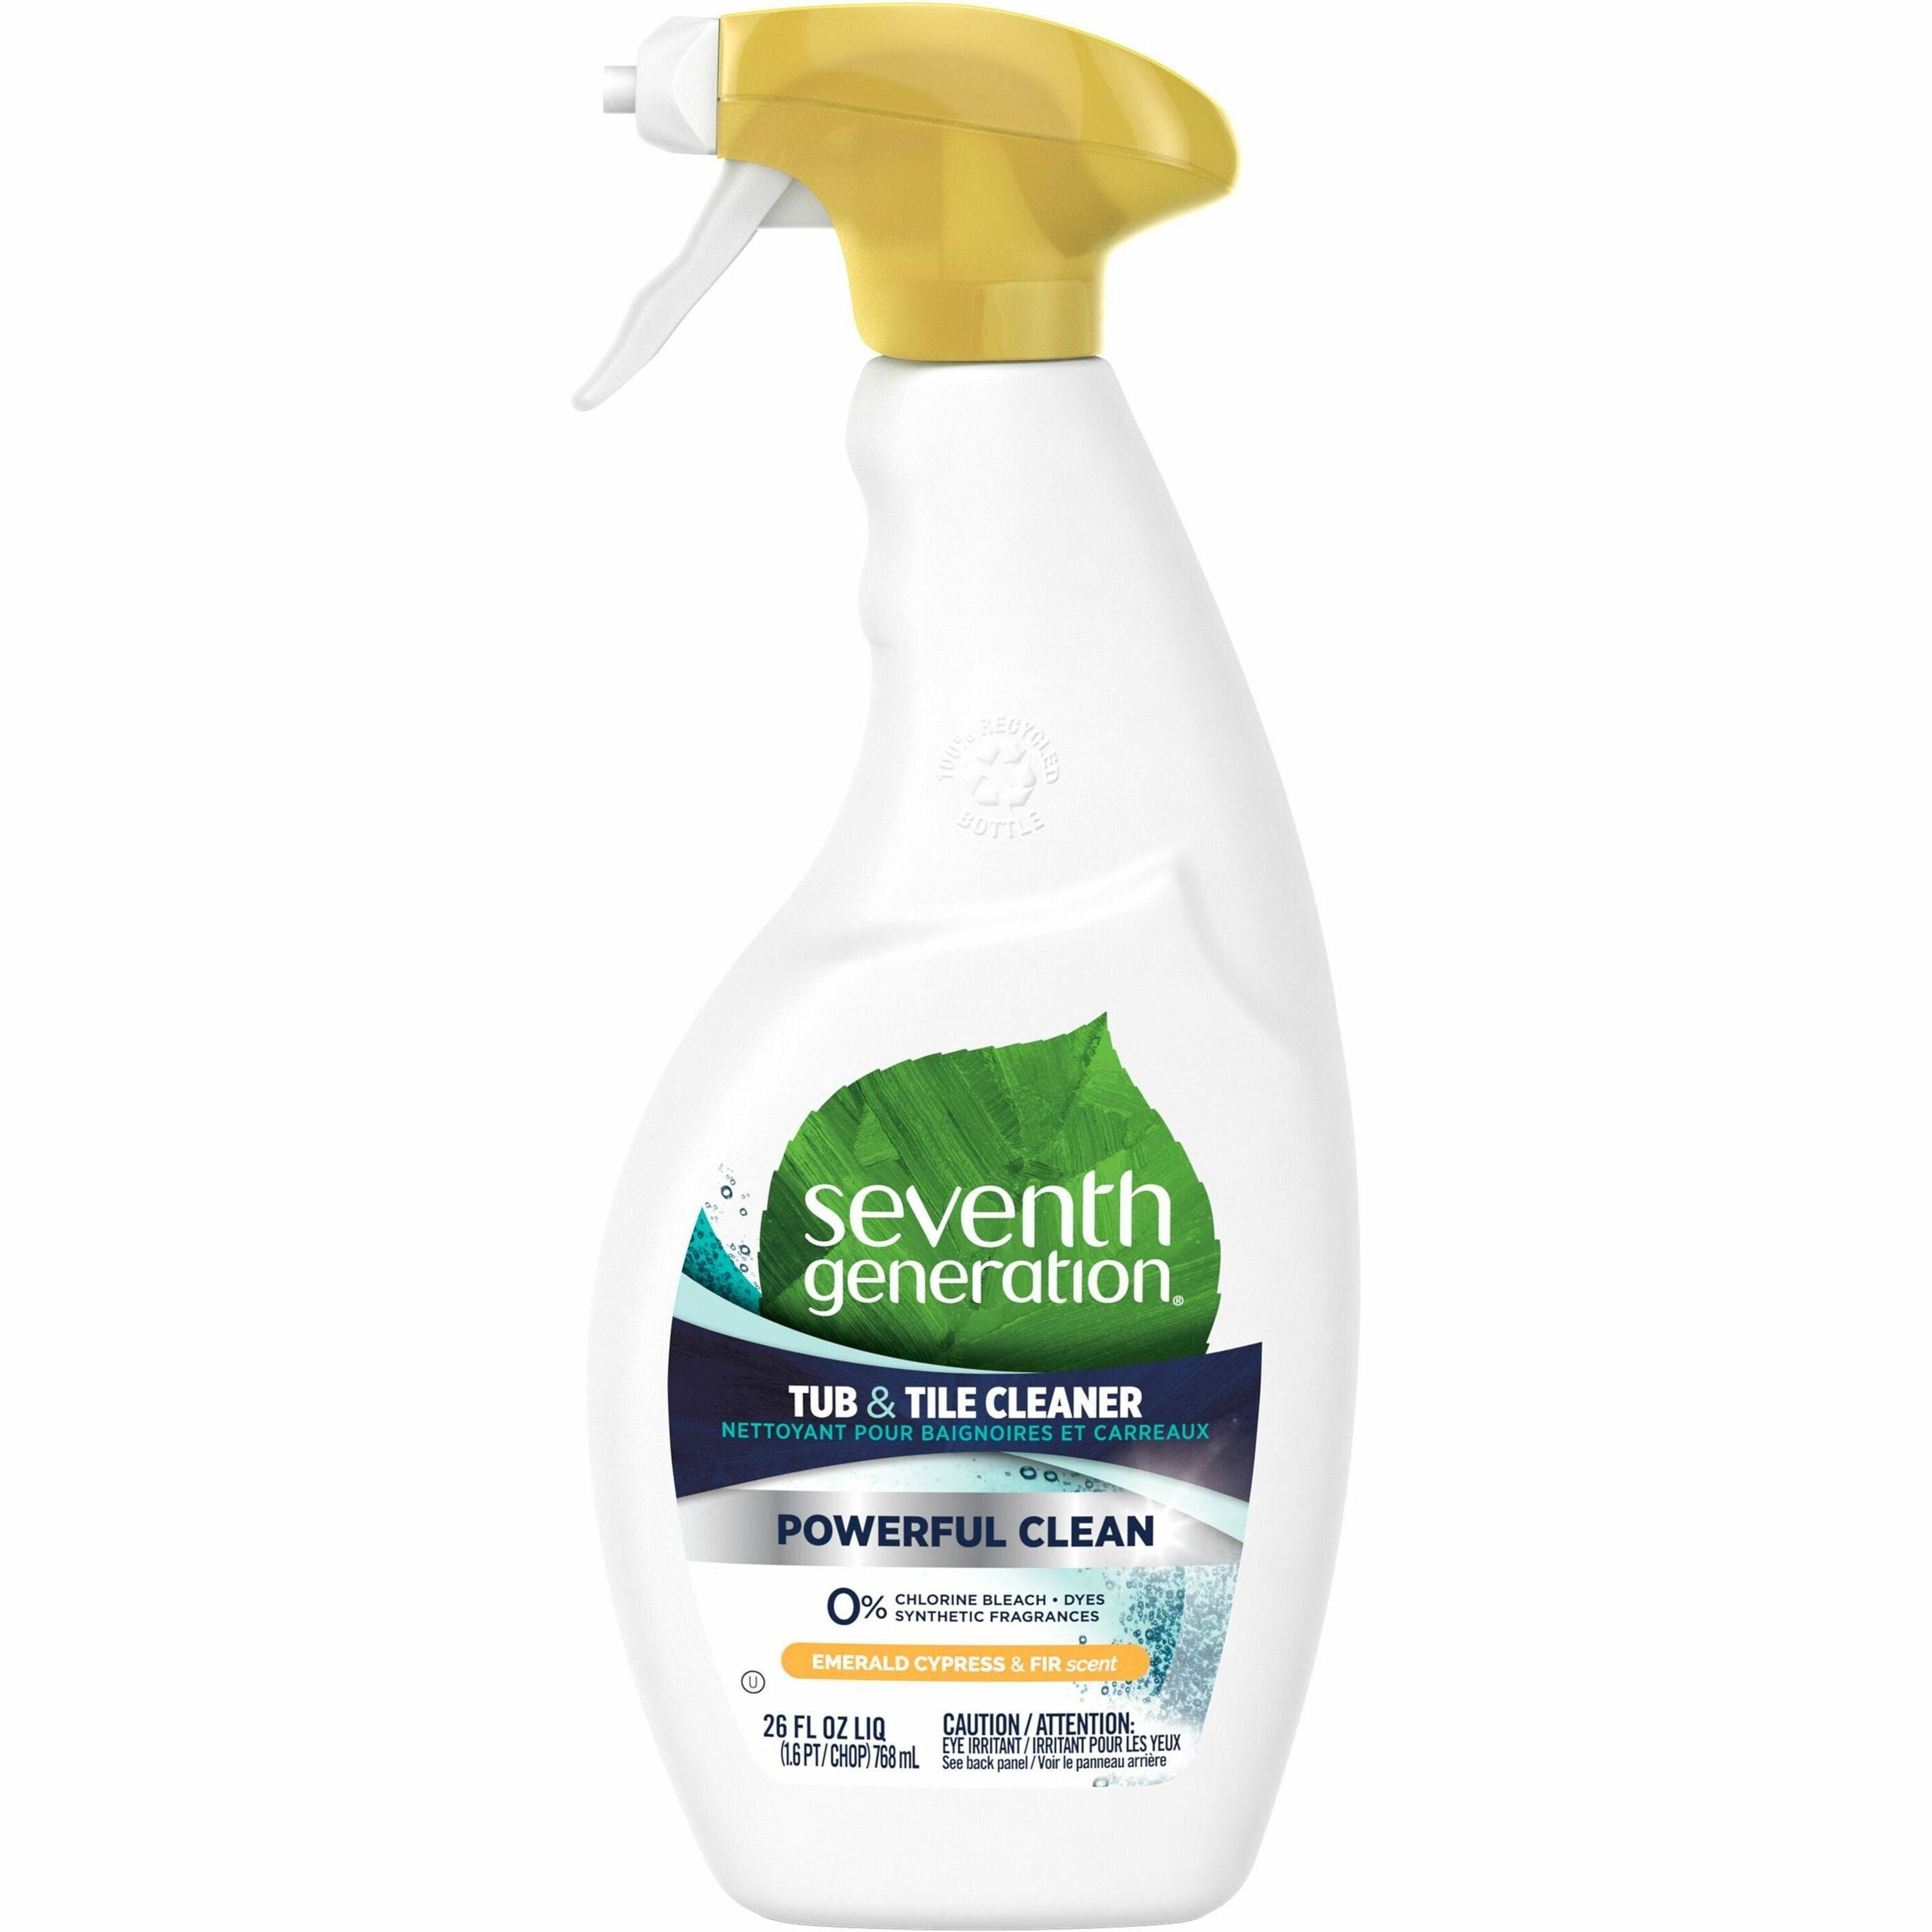 seventh-generation-natural-tub-and-tile-cleaner-concentrate-26-fl-oz-08-quart-emerald-cypress-&-fir-scent-1-each-non-toxic-fume-free-bio-based-kosher-dye-free-gluten-free-chlorine-free-bleach-free-white-multi_sev44774 - 1